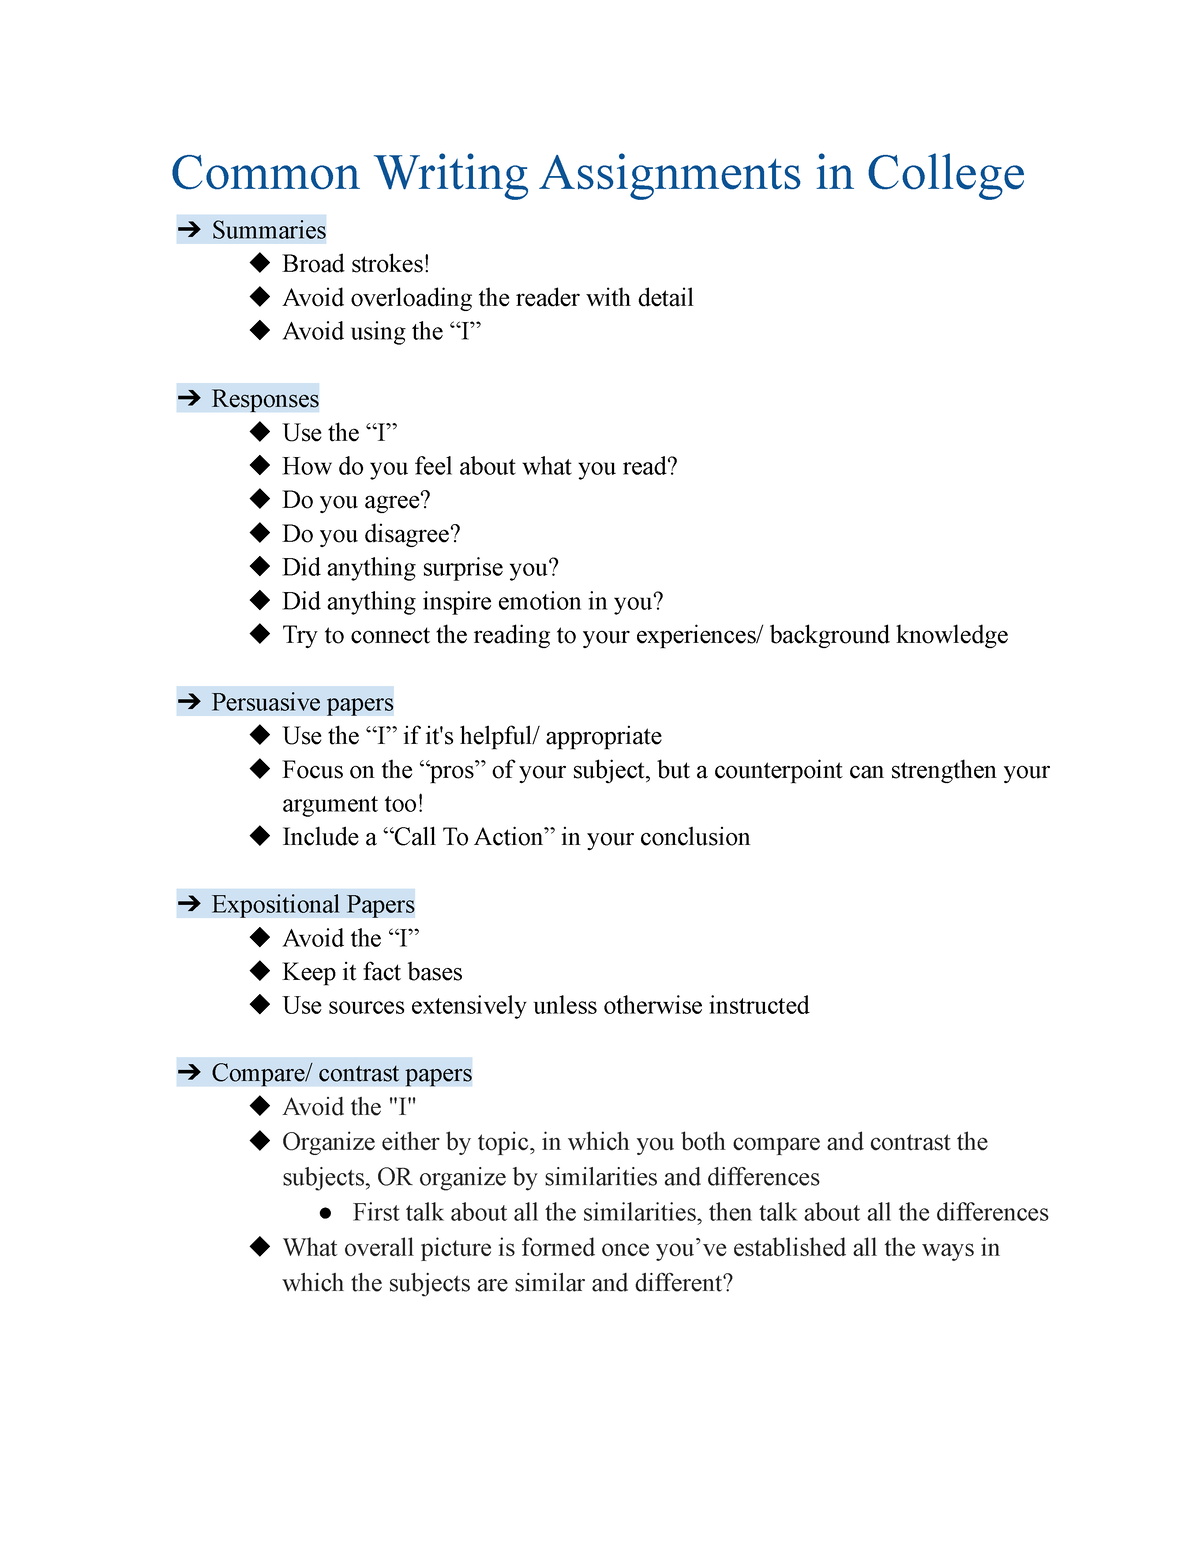 writing assignments in college courses give students